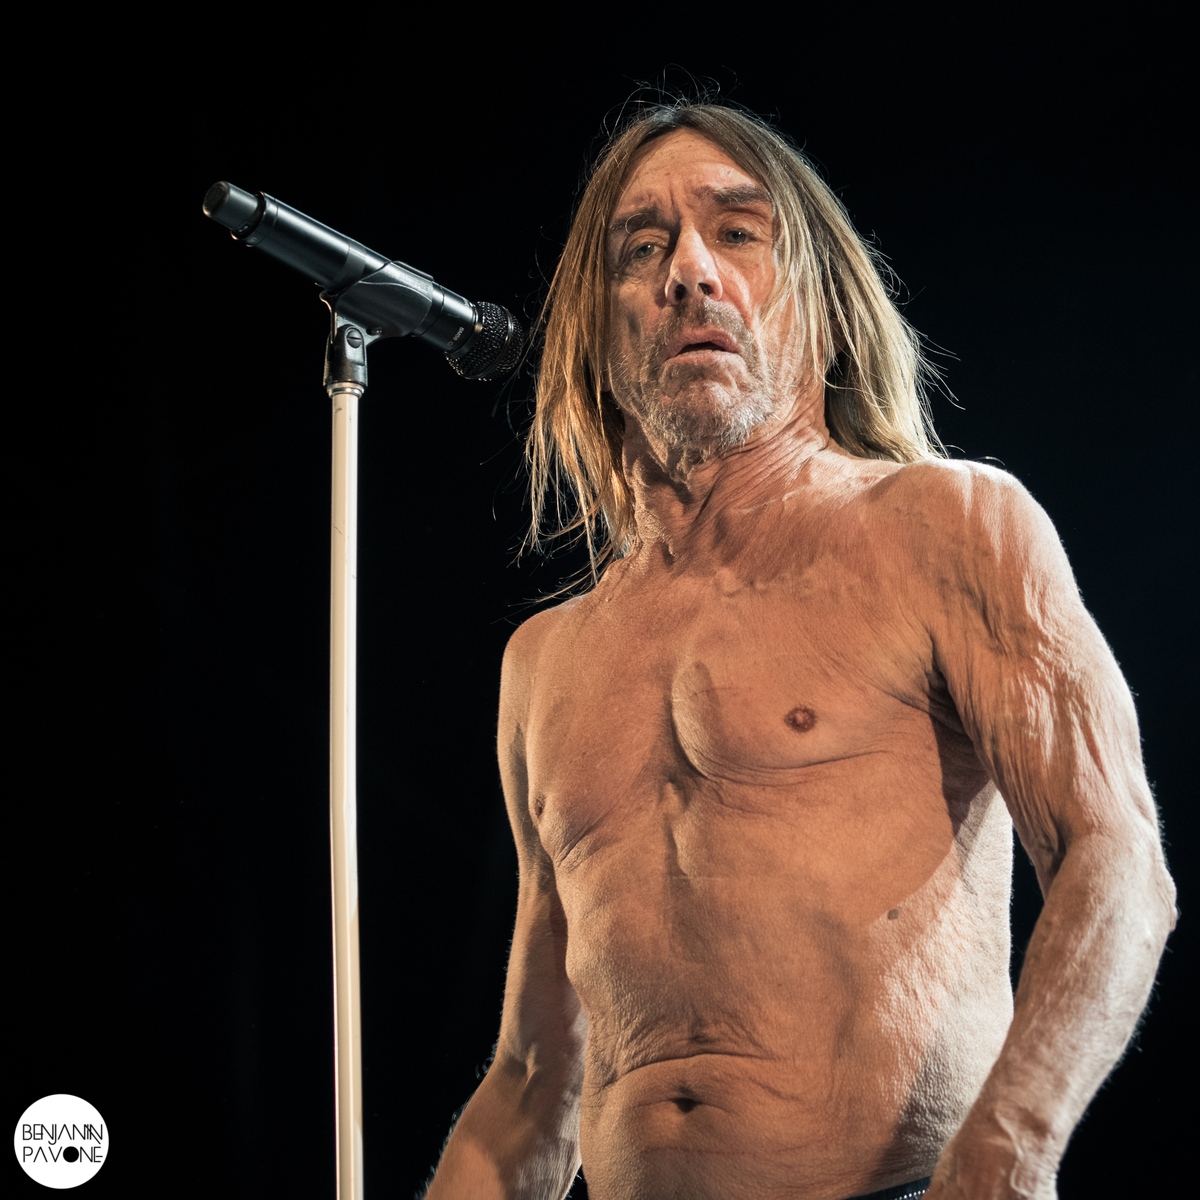 Festival Ecaussystème 2016 iggy-pop-and-the-stooges